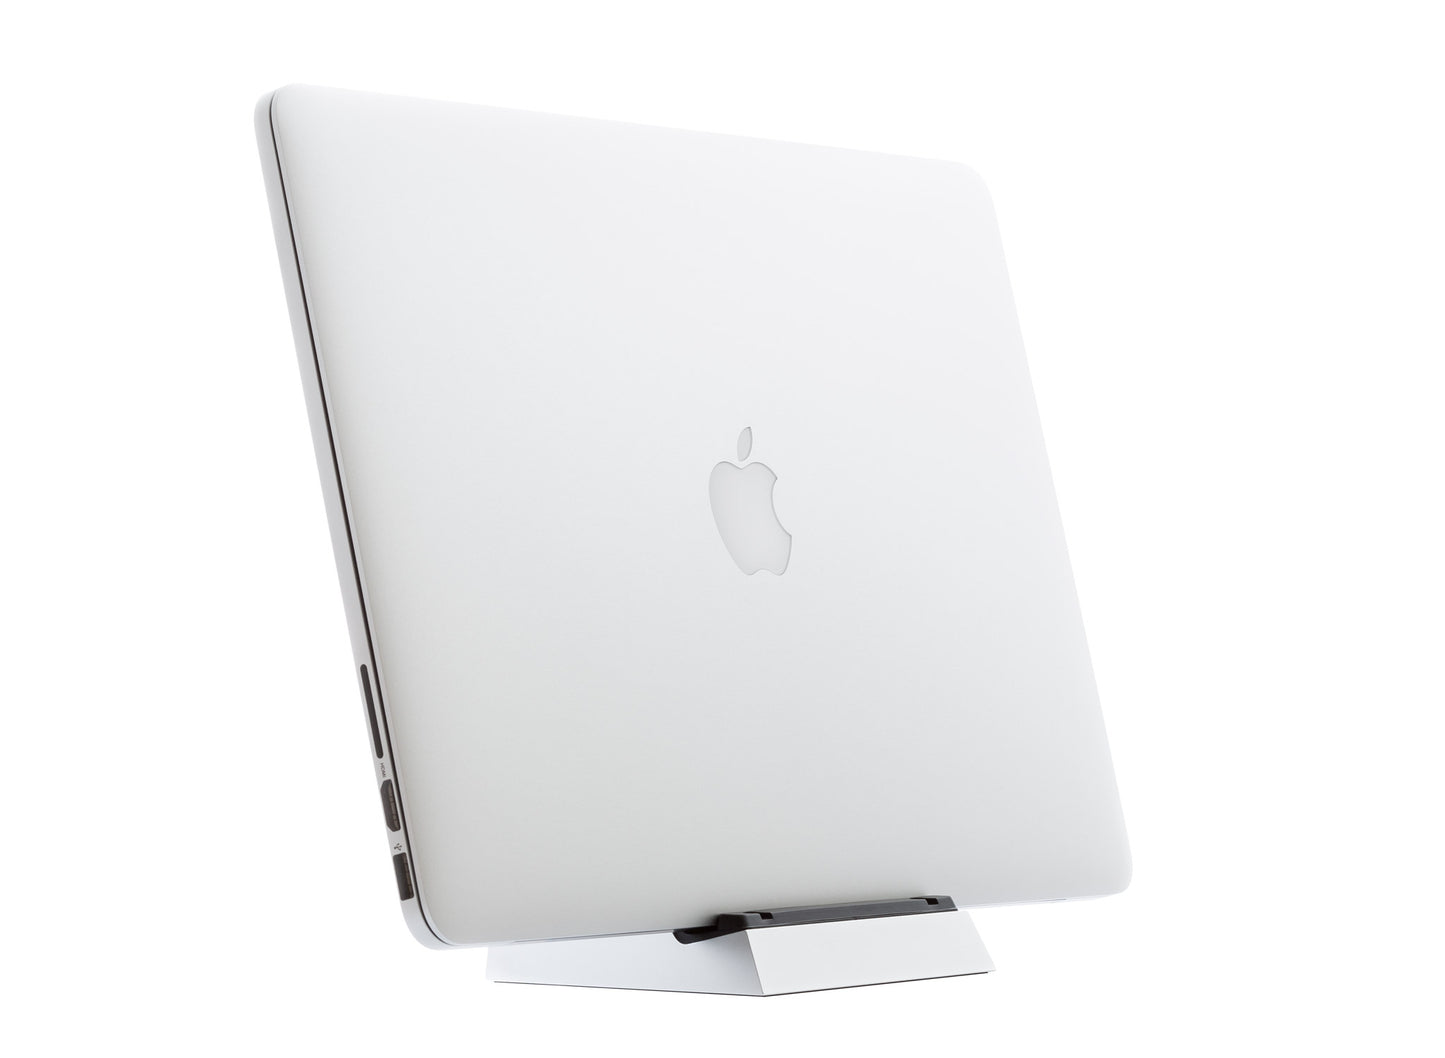 SVALT Cooling Dock model DLx silver front side view for quiet fan cooling performance with Apple laptop MacBook Pro